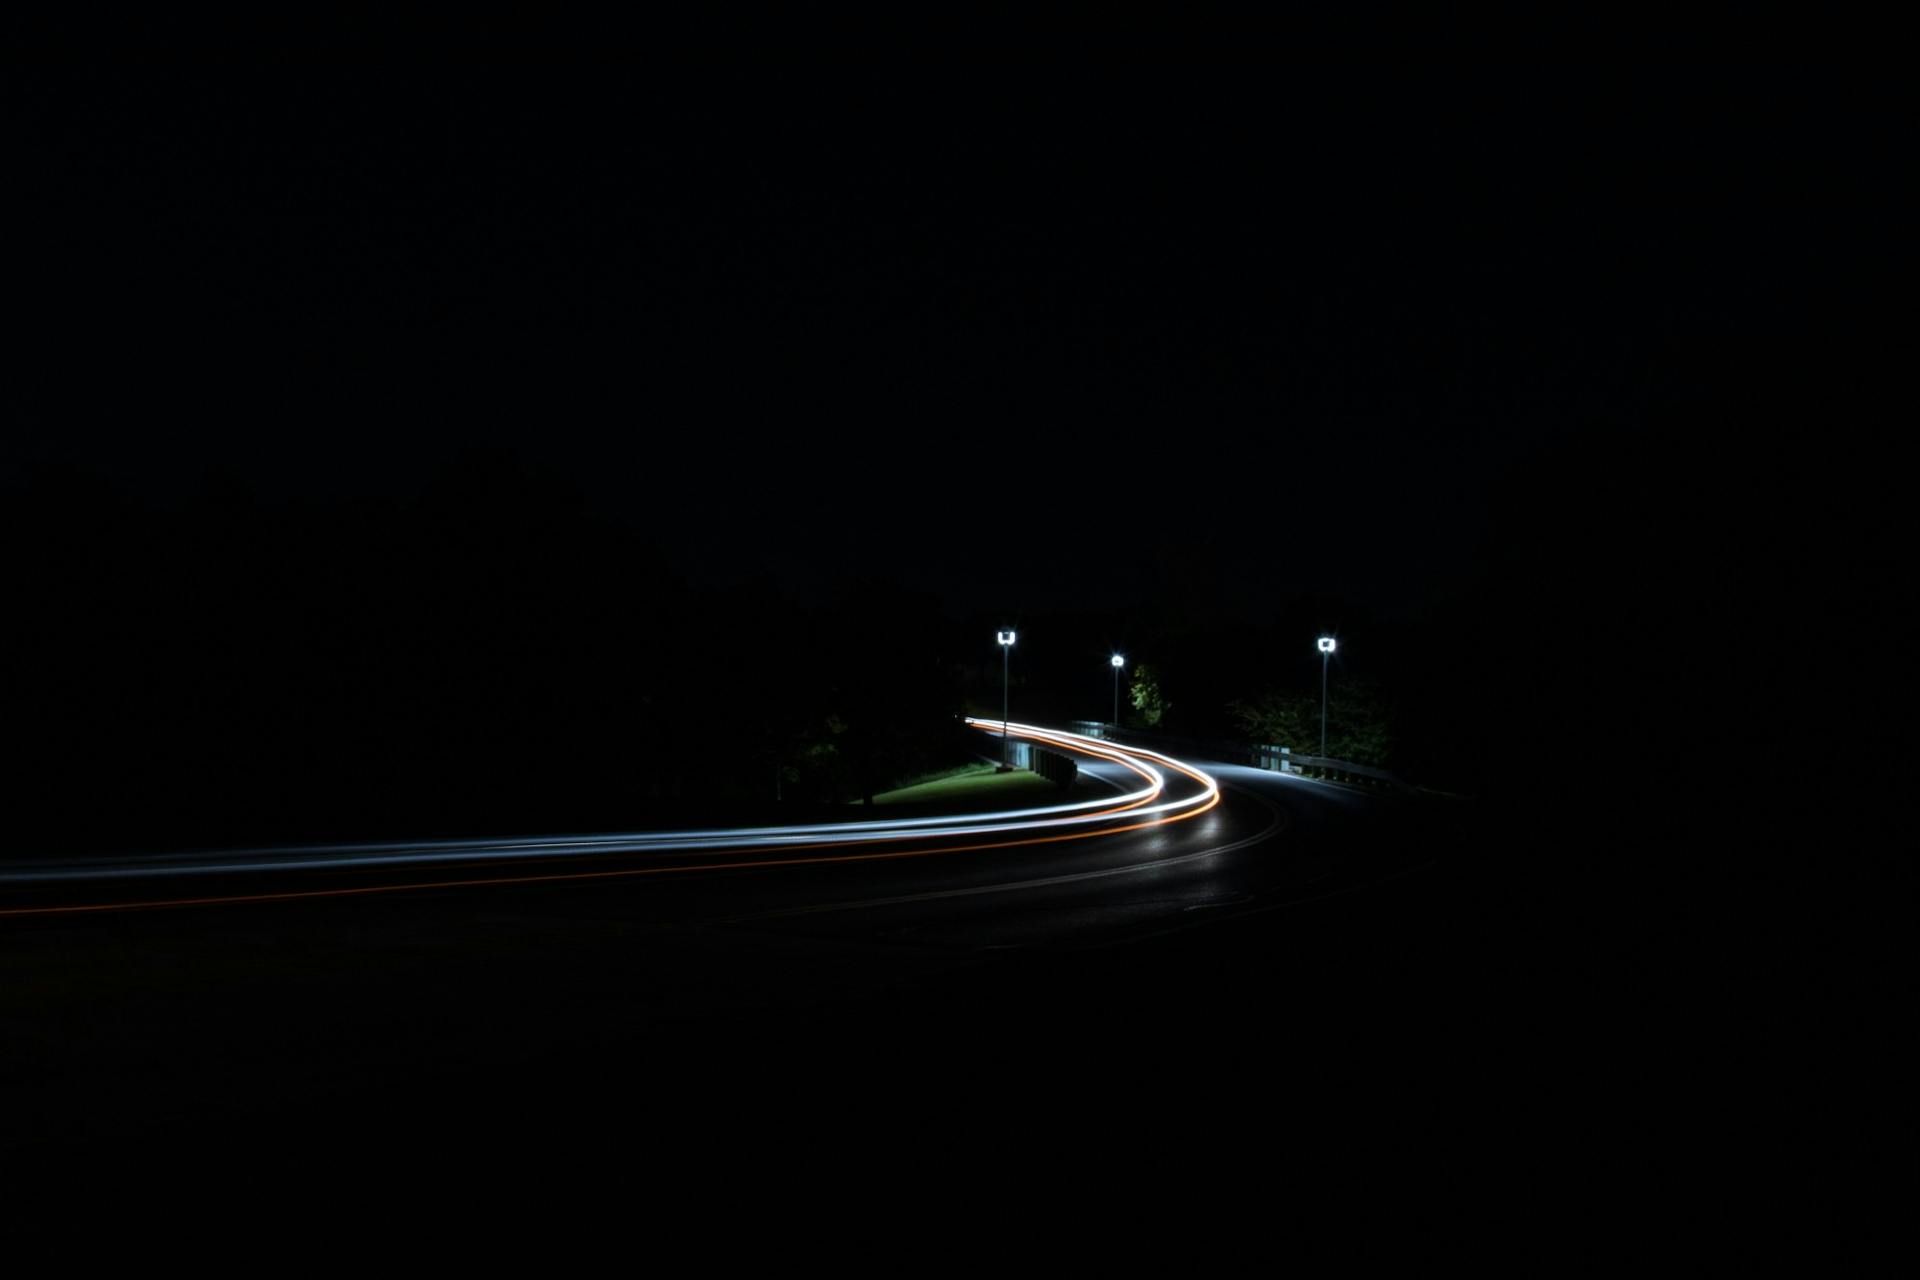 Long exposure lights on a road with lamposts.